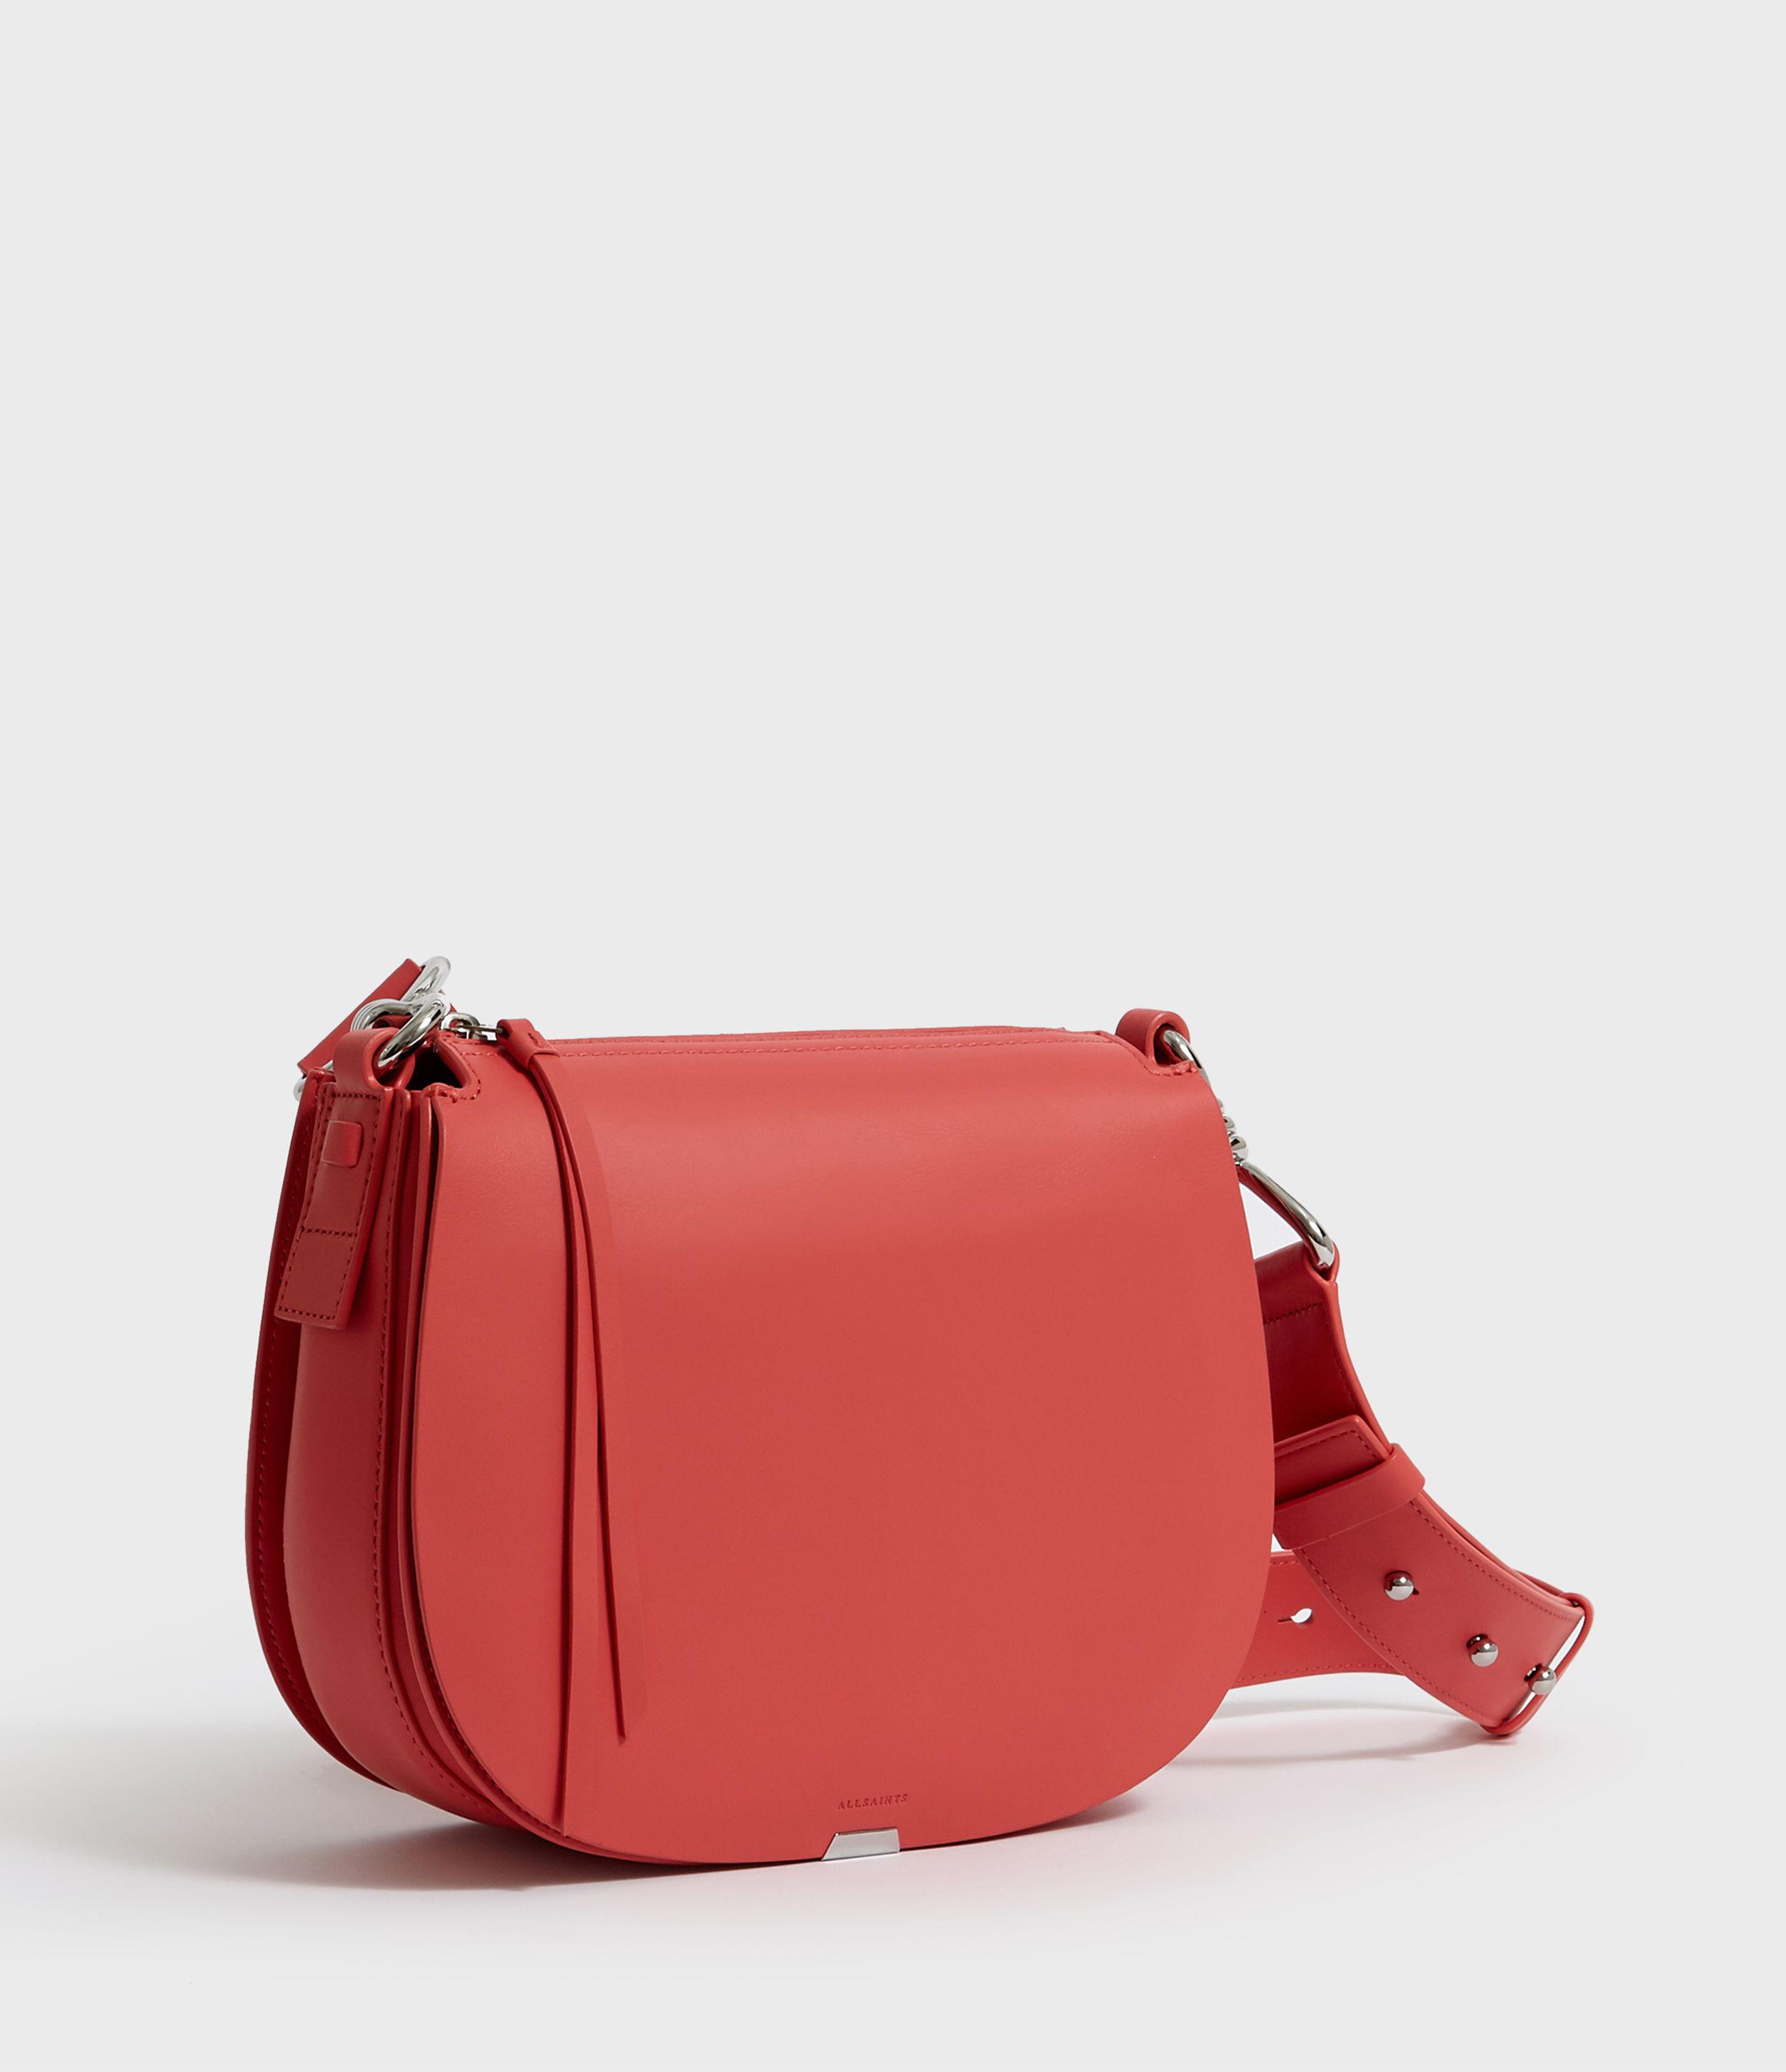 AllSaints Captain Leather Round Crossbody Bag in Coral Pink (Red) - Lyst